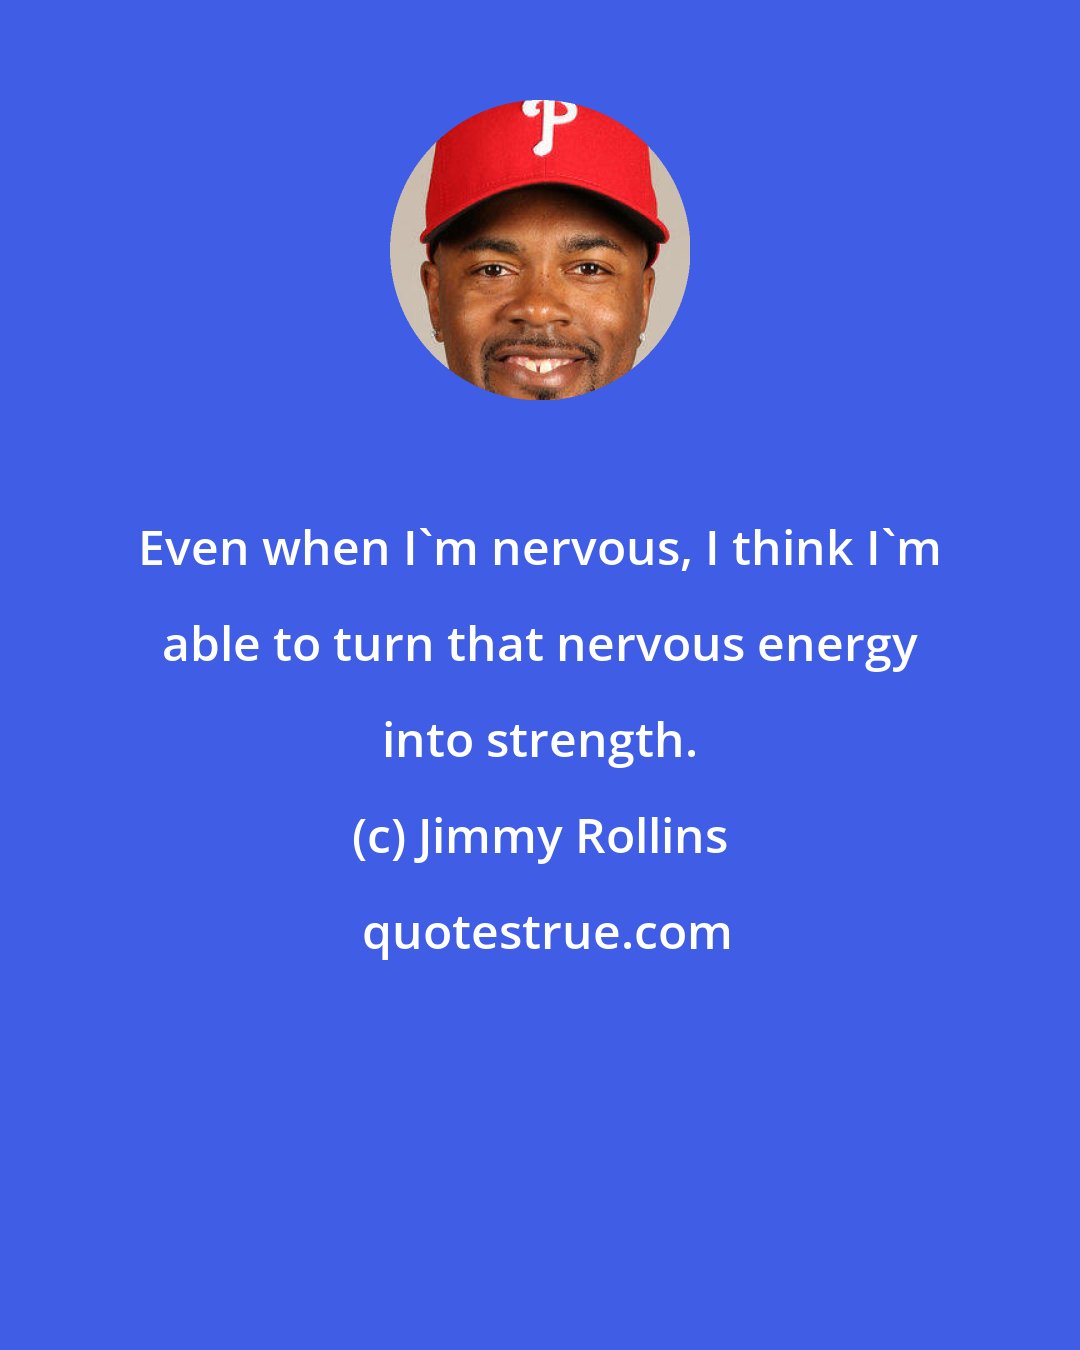 Jimmy Rollins: Even when I'm nervous, I think I'm able to turn that nervous energy into strength.